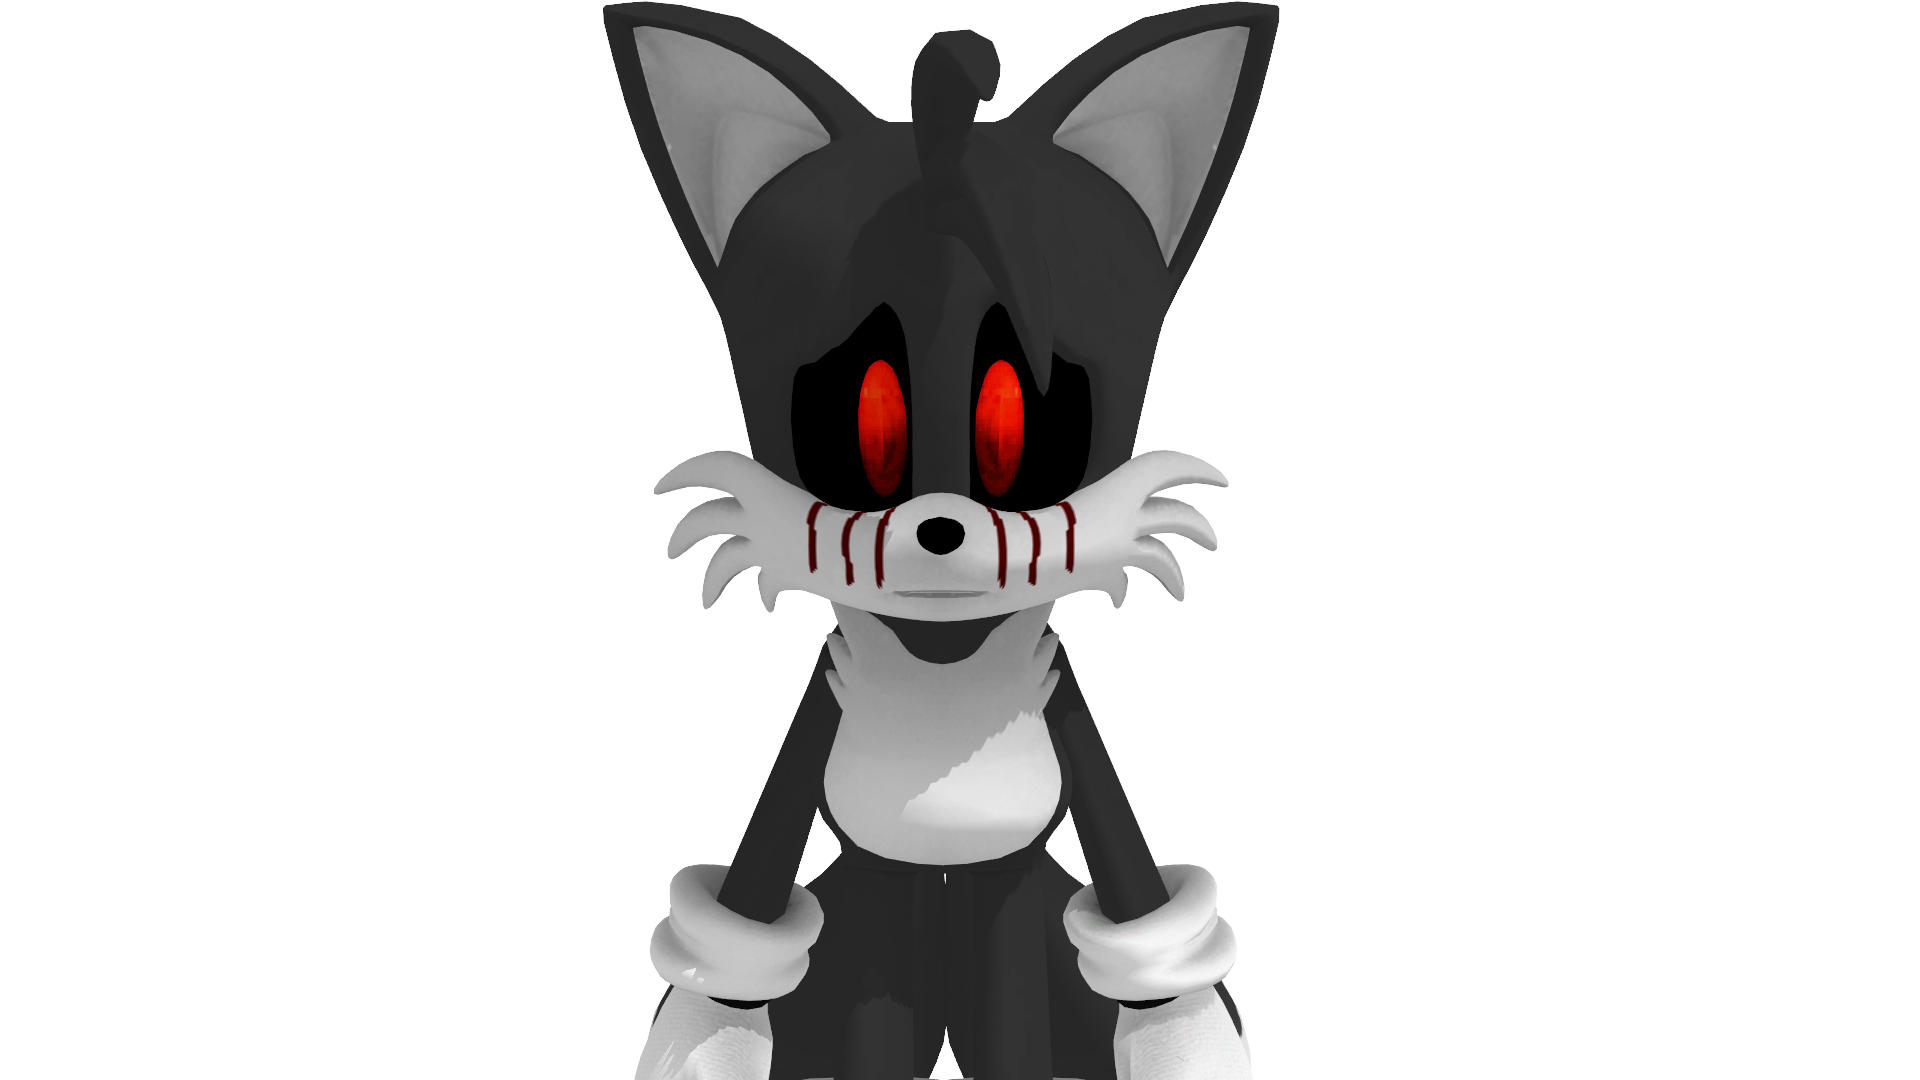 MMD) Sad Tails.Exe by S213413 on DeviantArt